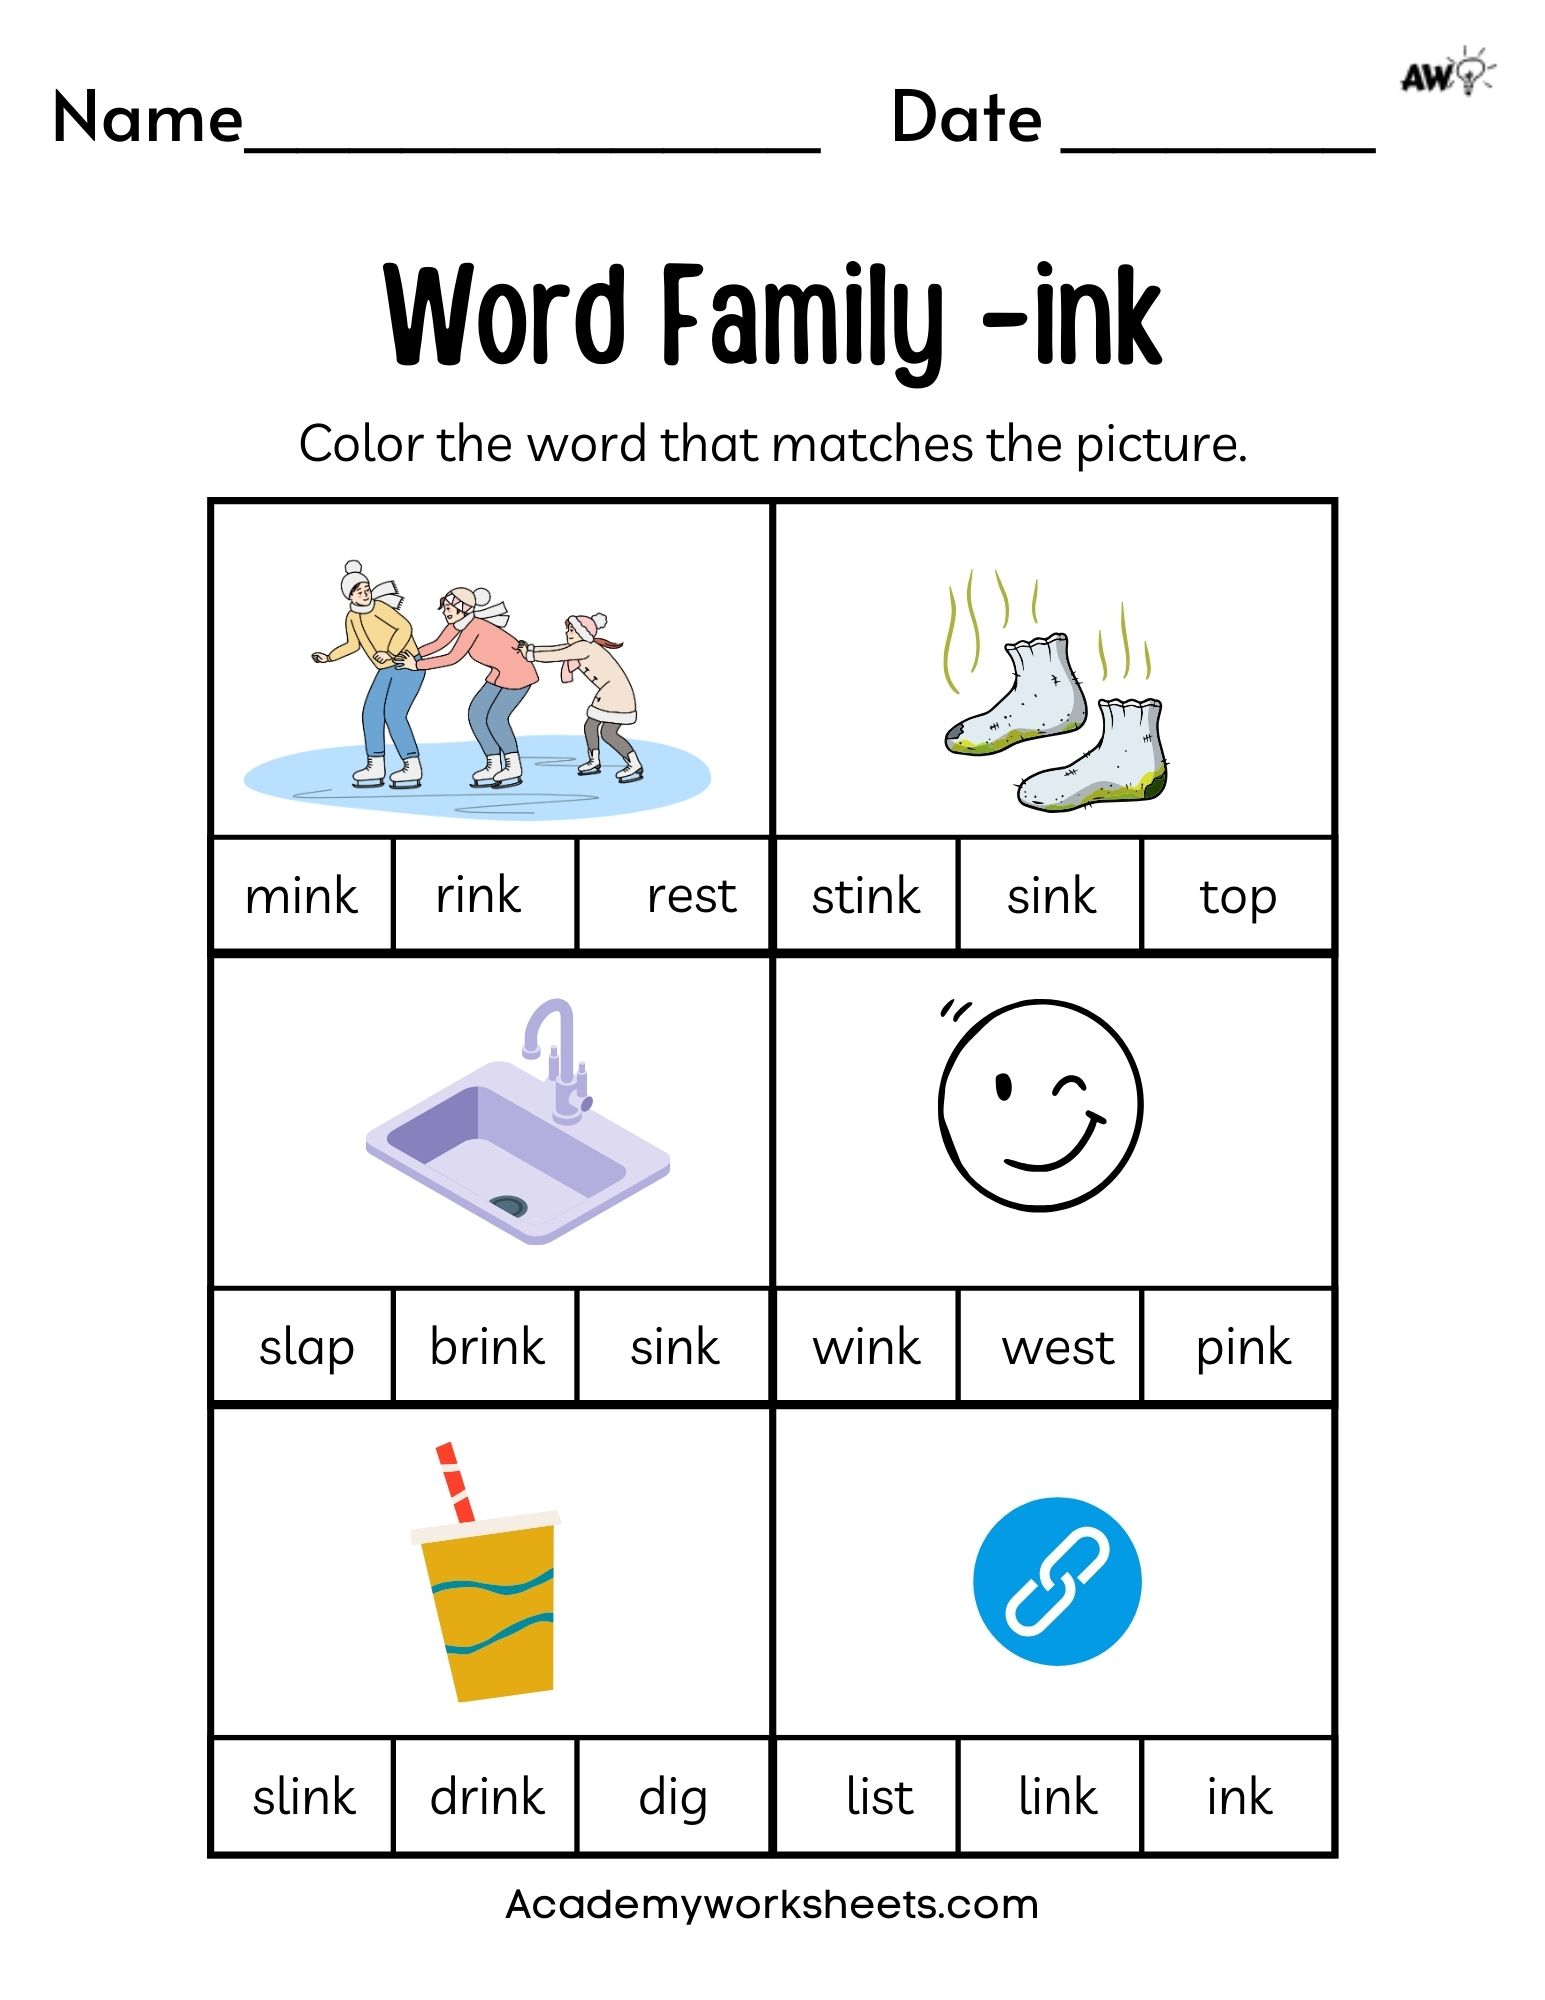 Free word family worksheets